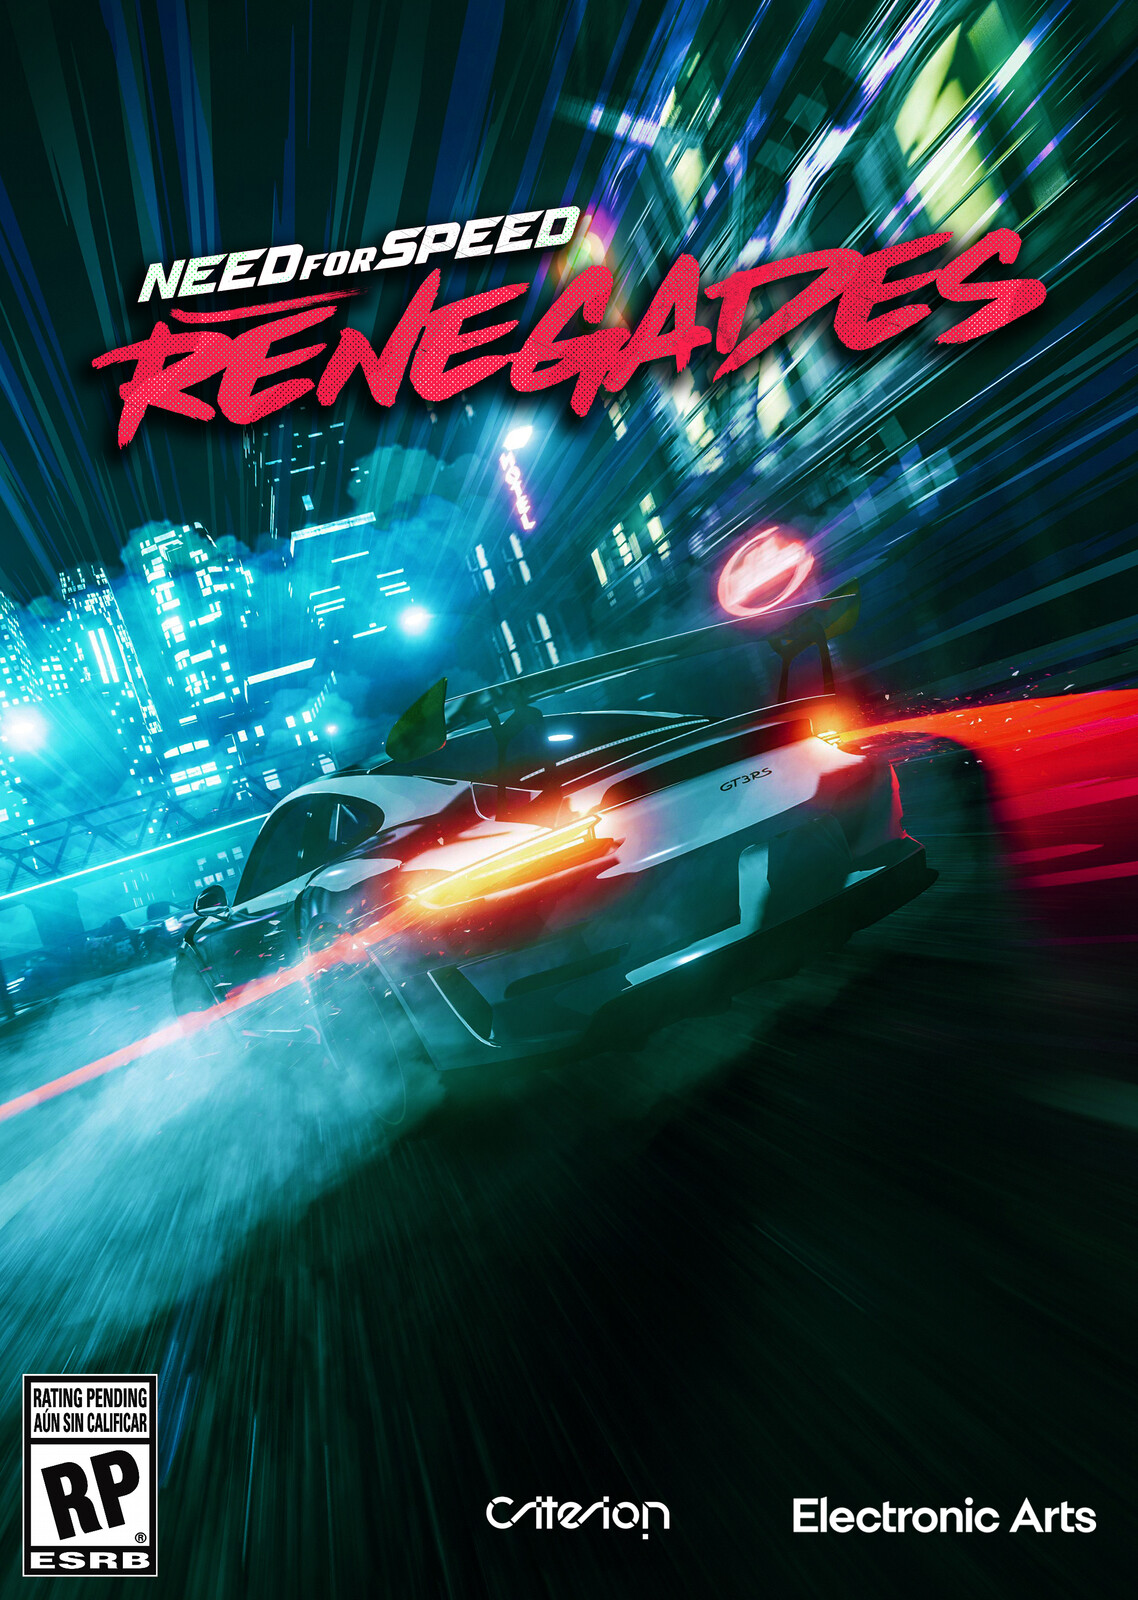 NFS Renegades (Based on the NXS concept, Original Render by @Darudnik)